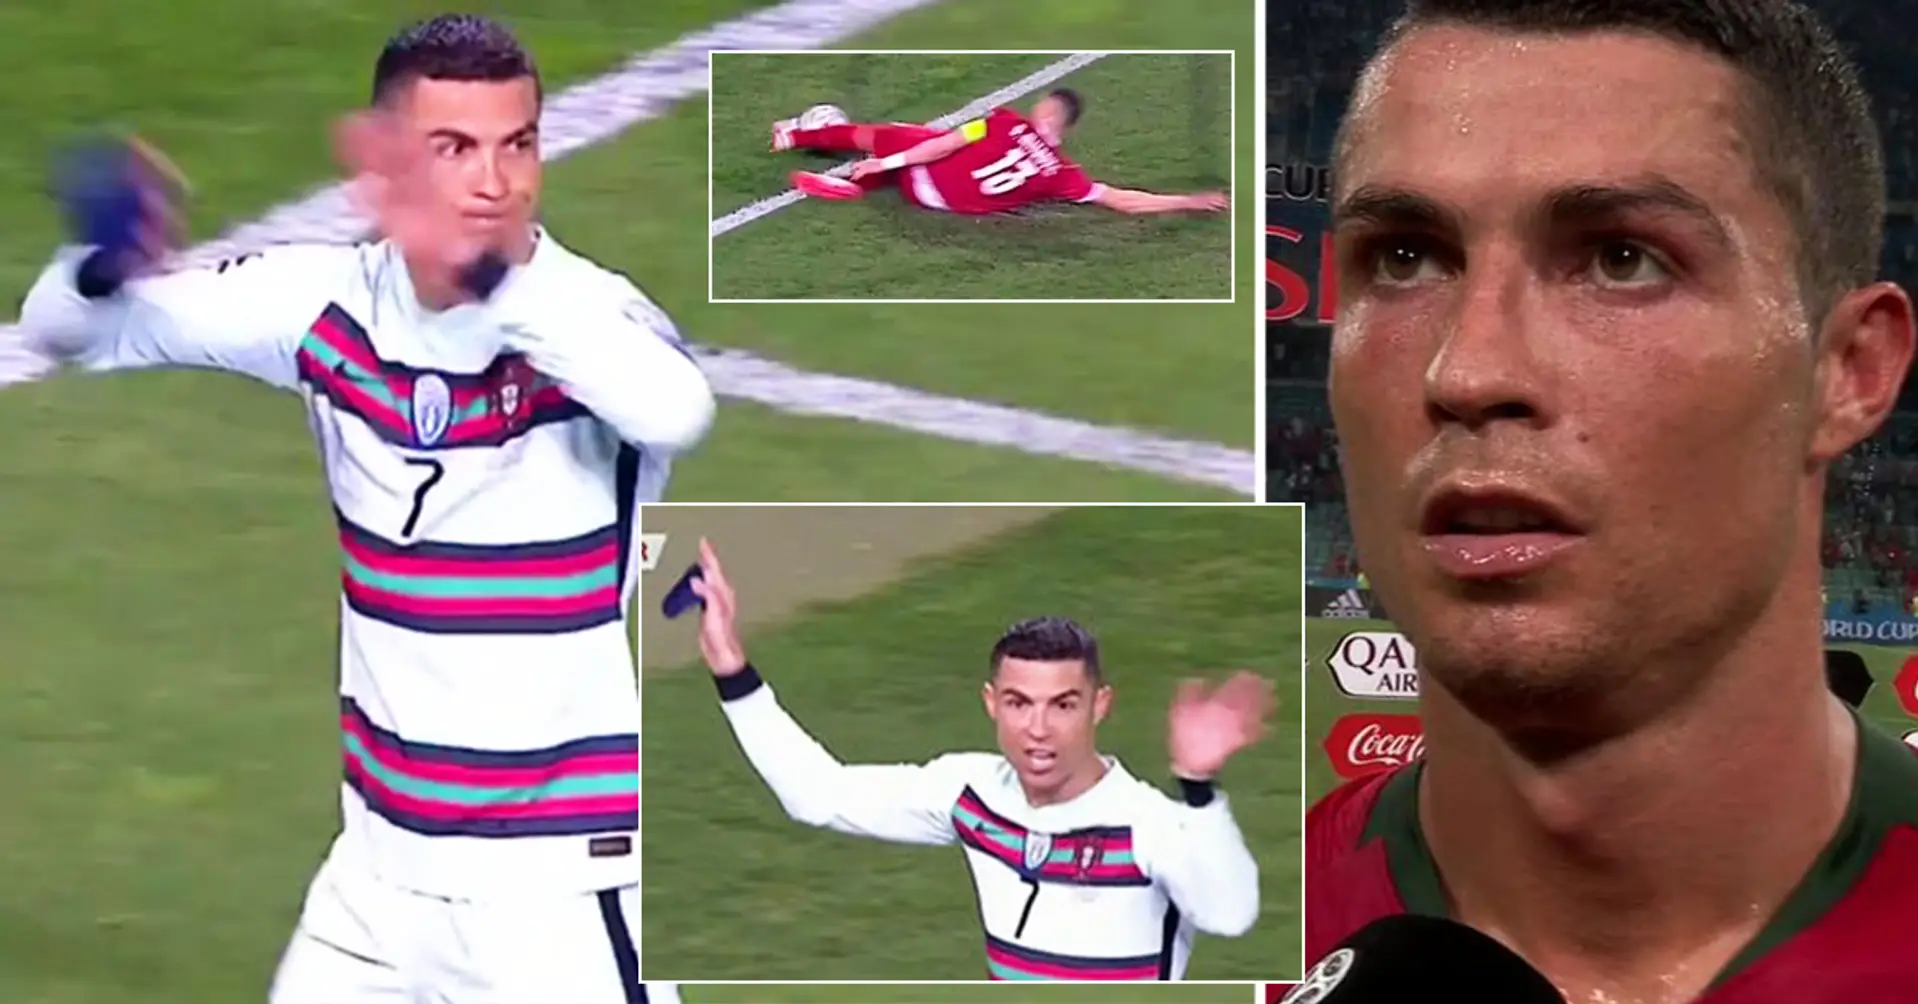 'It will never change'. Cristiano explains why he furiously left the pitch before final whistle vs. Serbia